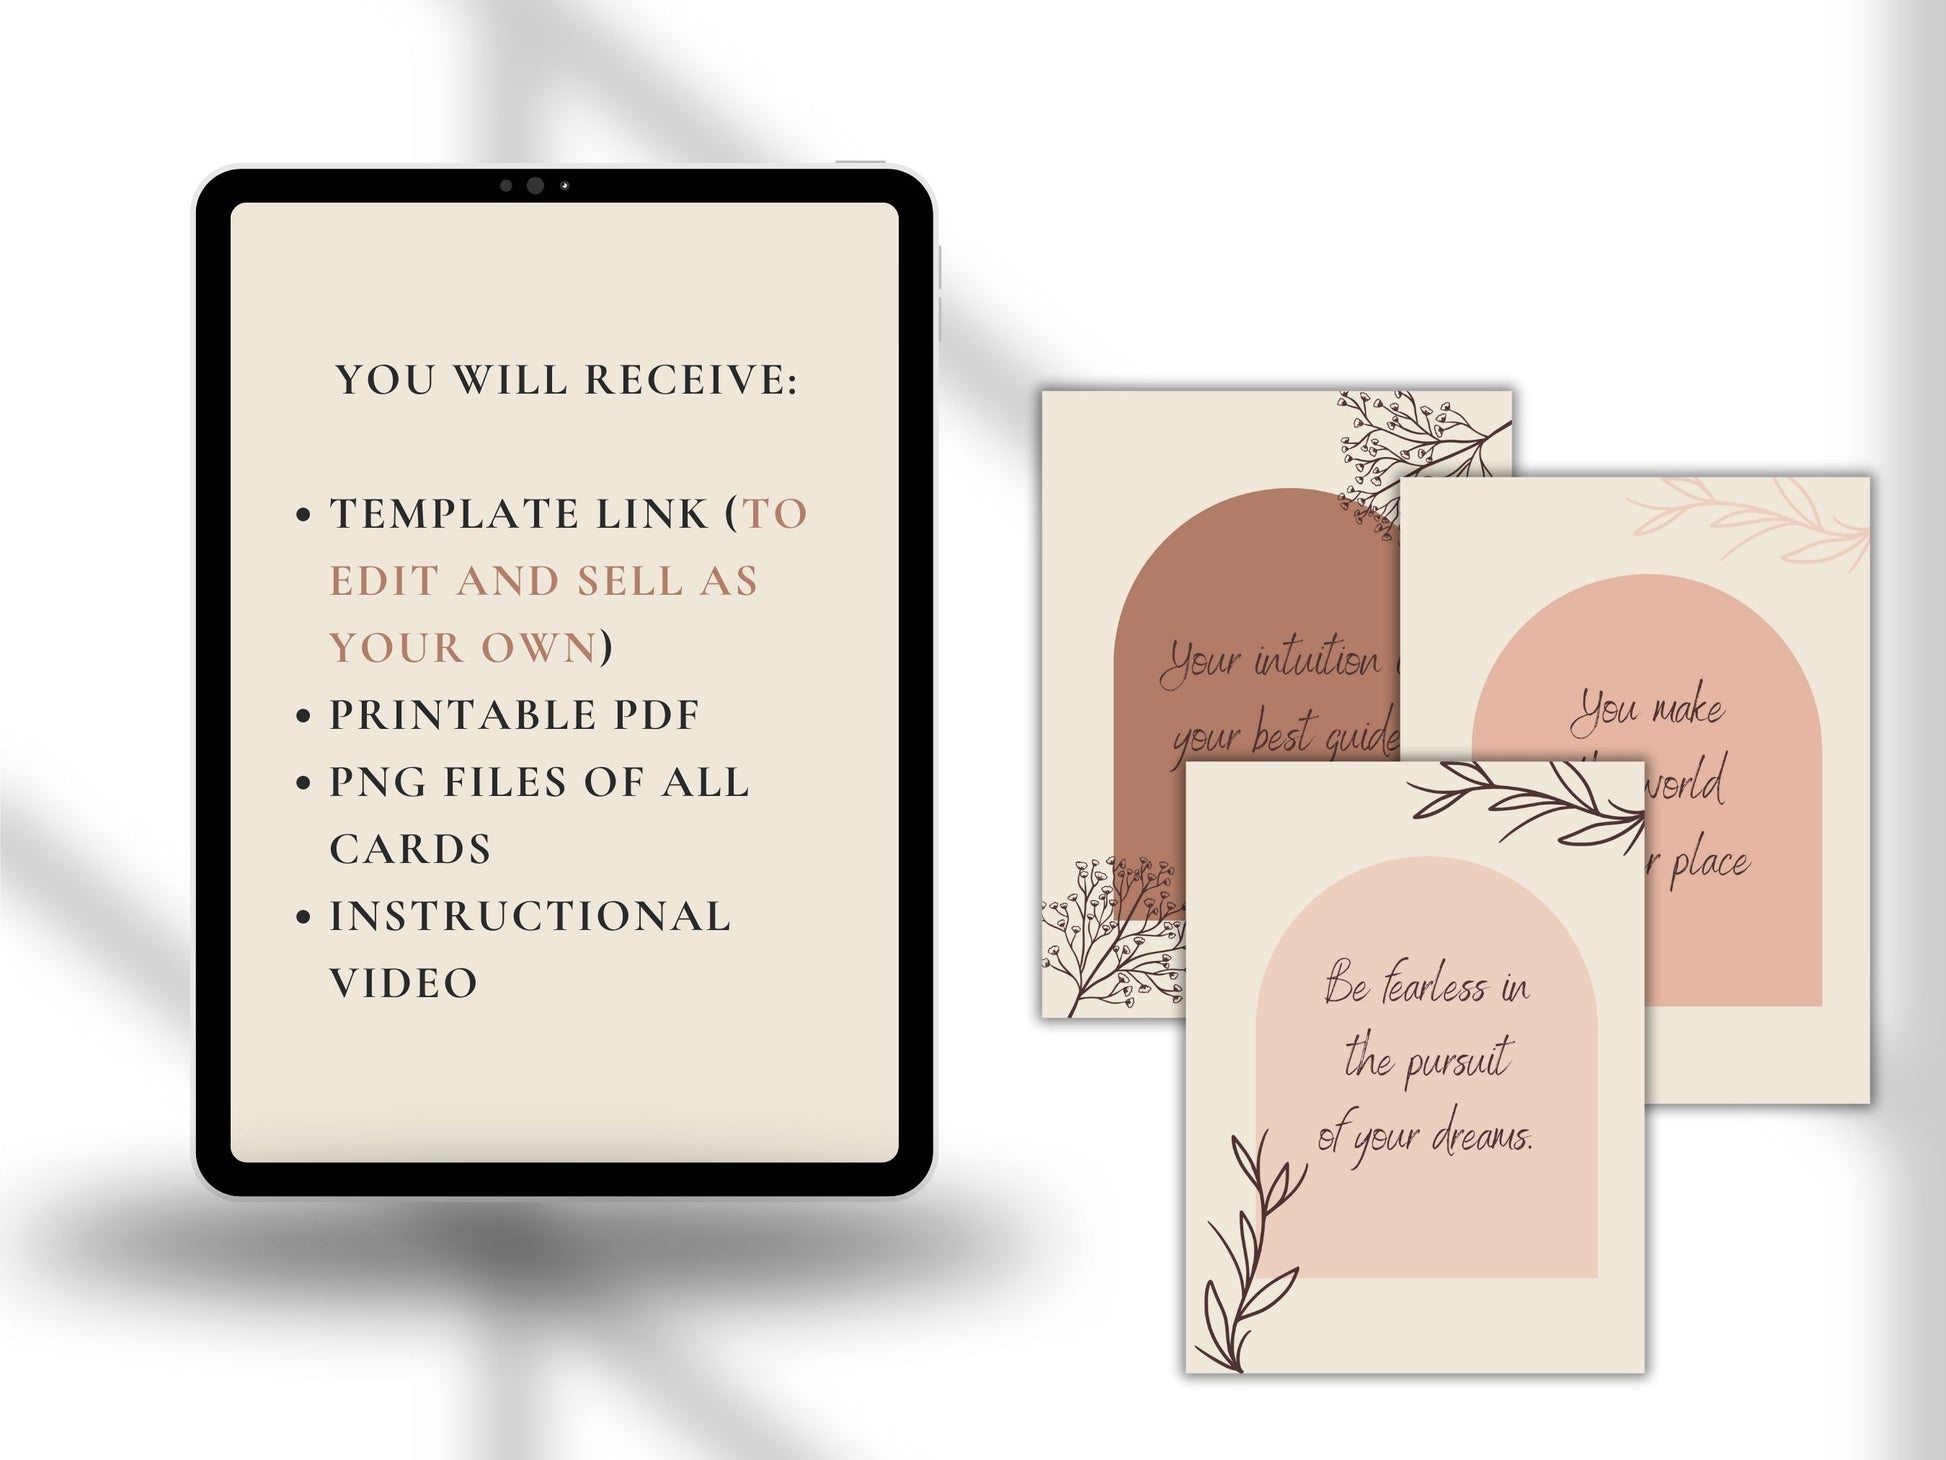 This slide shows what you will receive with this purchase. it includes a template link for editing, a printable pdf, png files and an instructional video